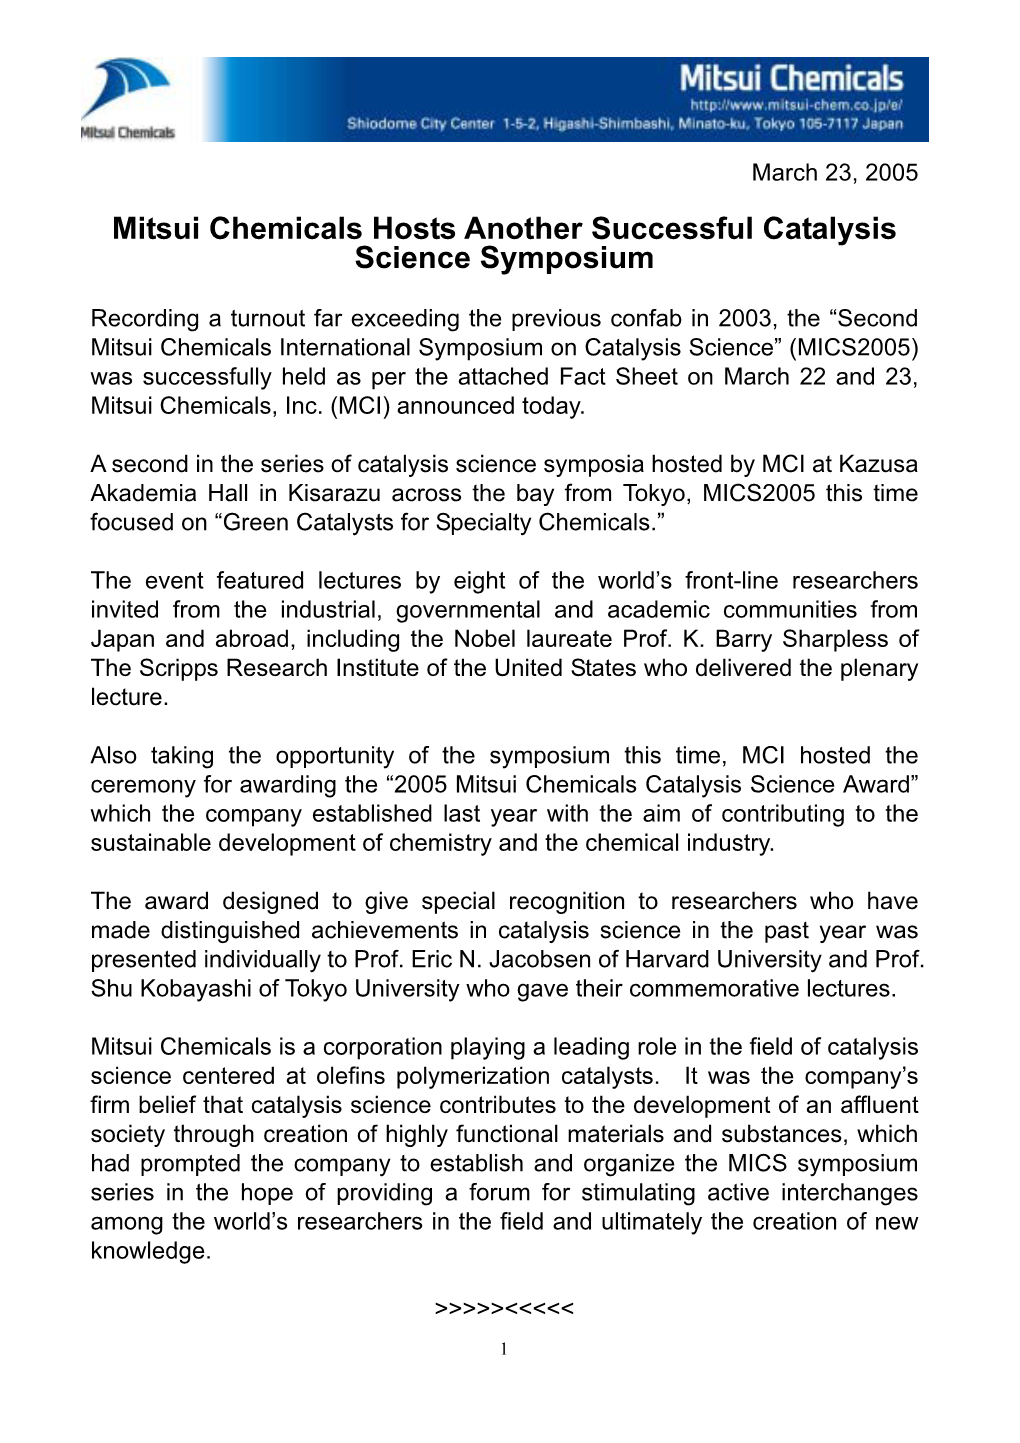 Mitsui Chemicals Hosts Another Successful Catalysis Science Symposium